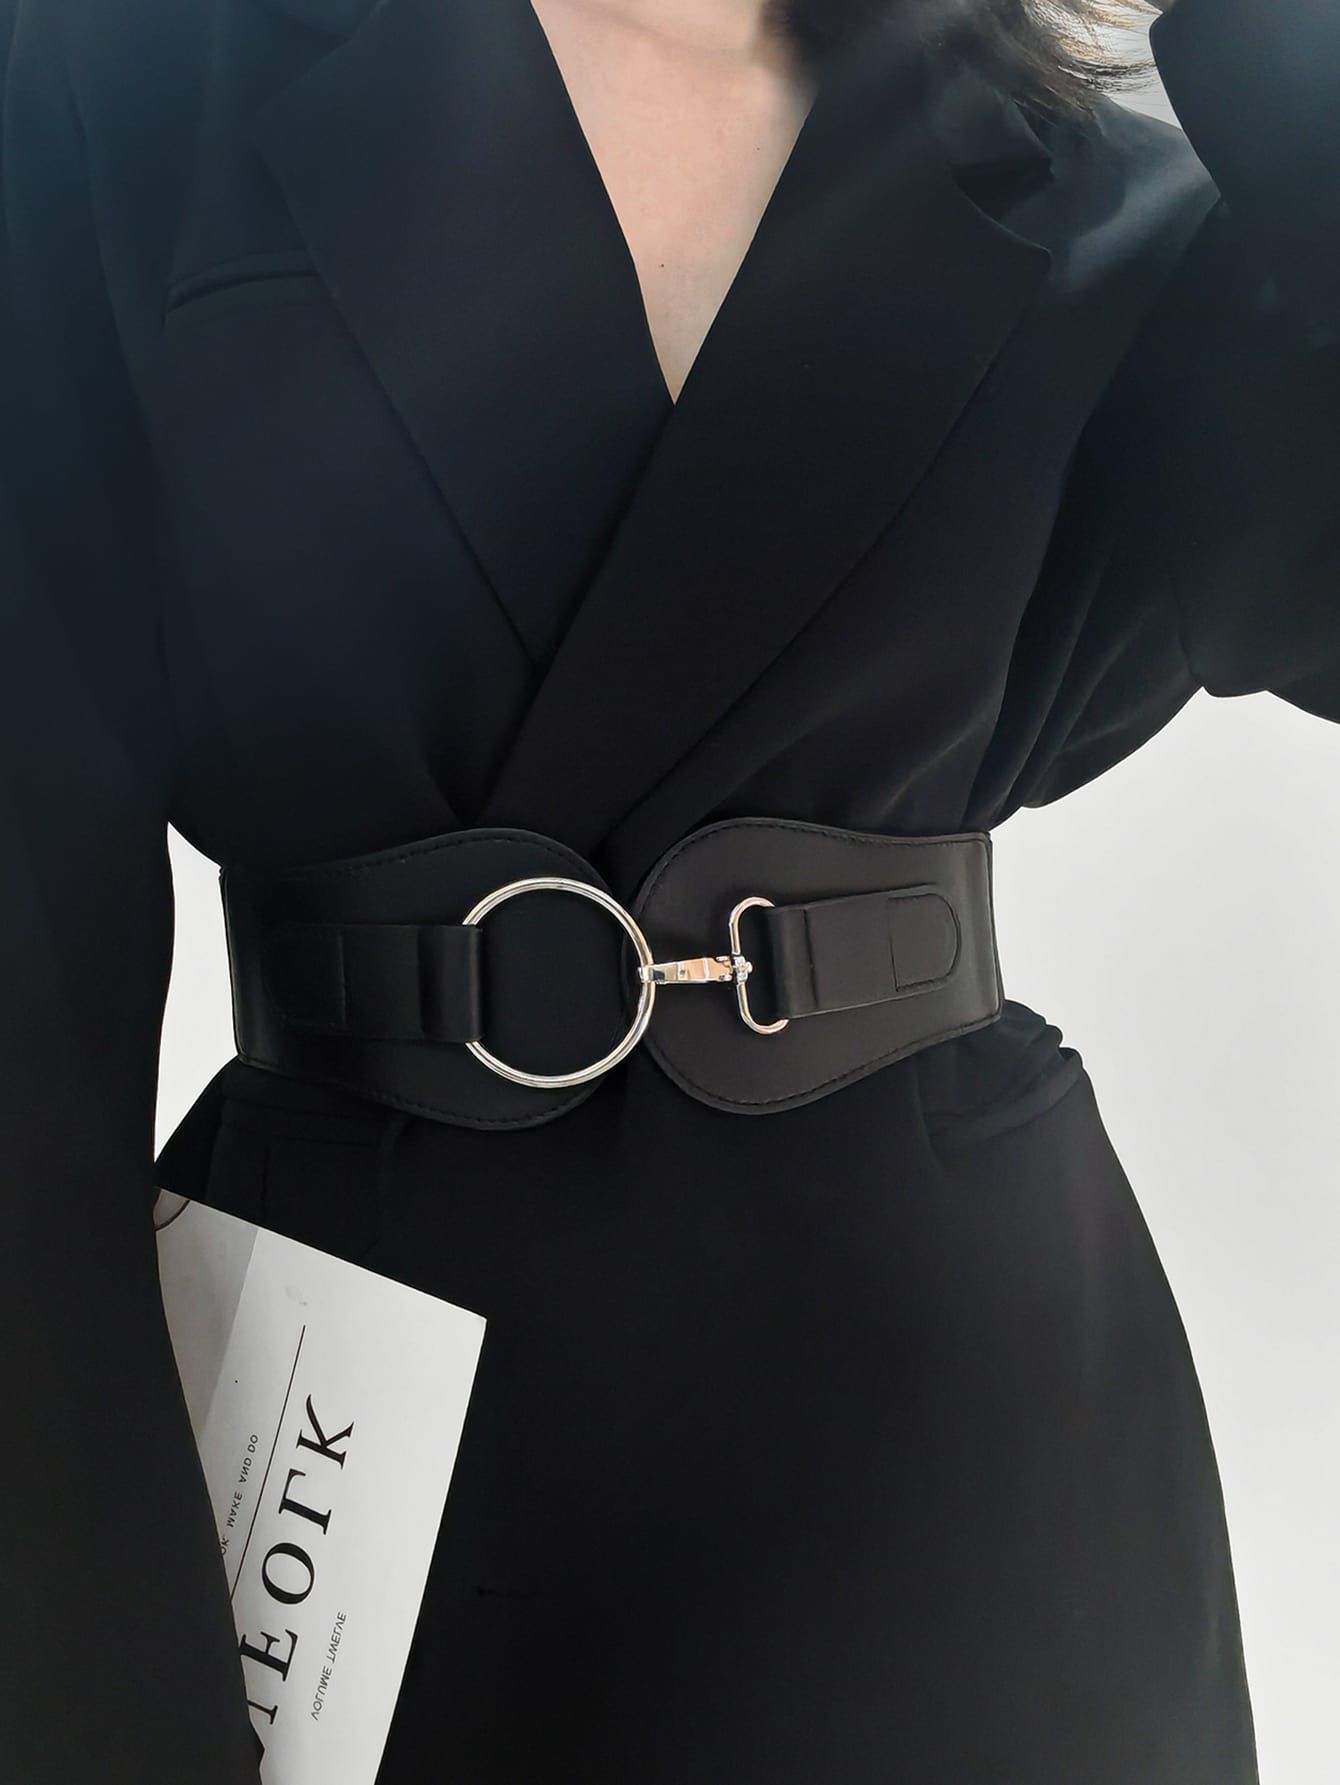 Accessorize with Style: Wide Belts for Statement Looks